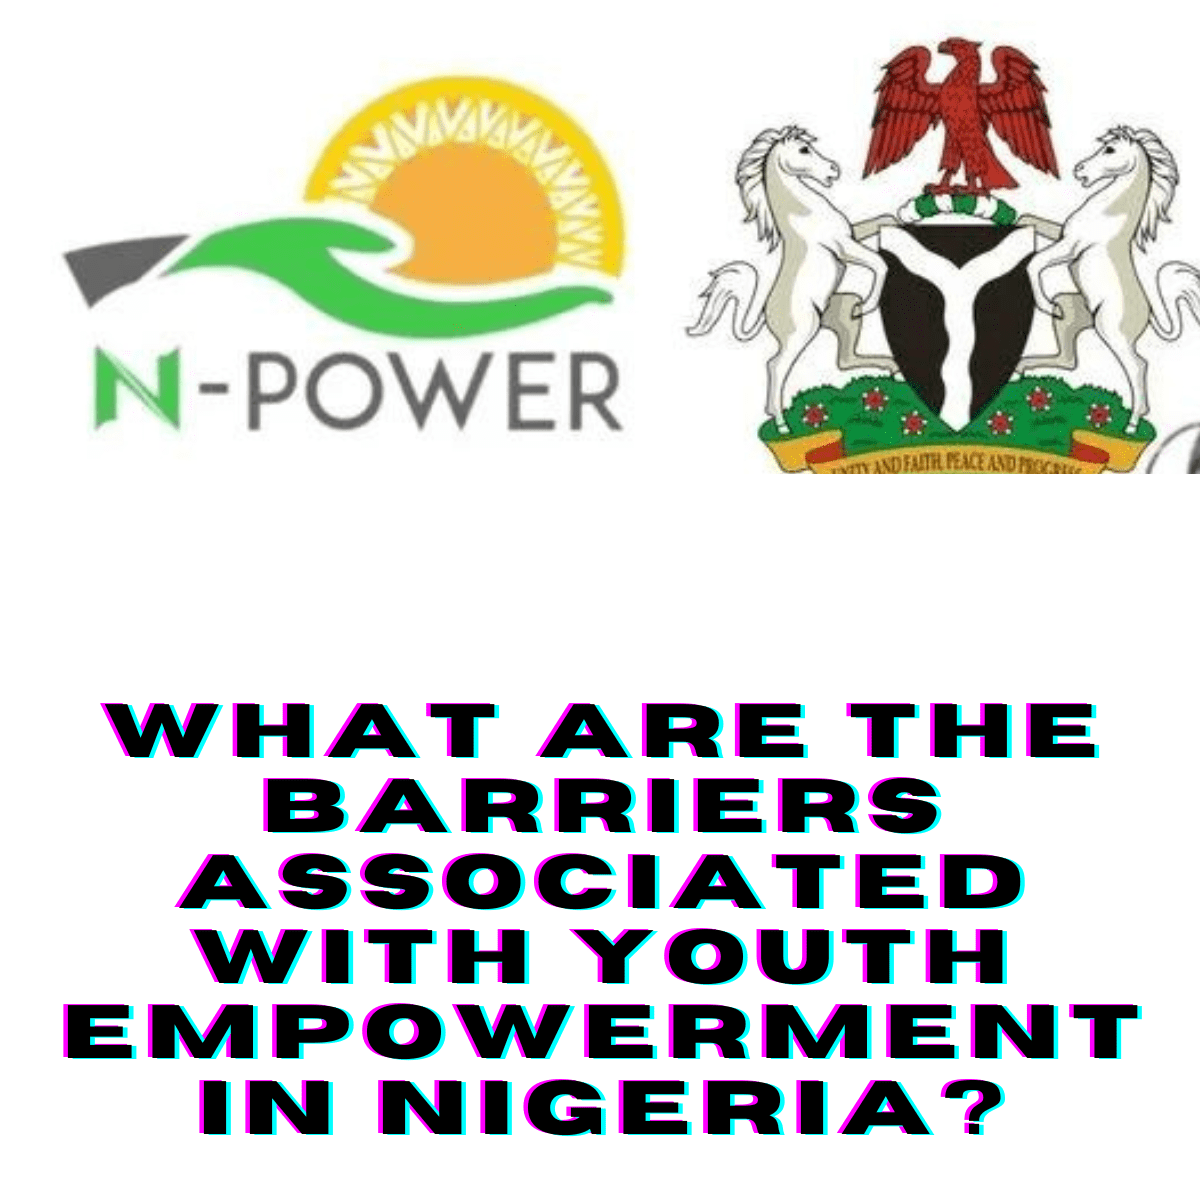 What Are The Barriers Associated With Youth Empowerment In Nigeria